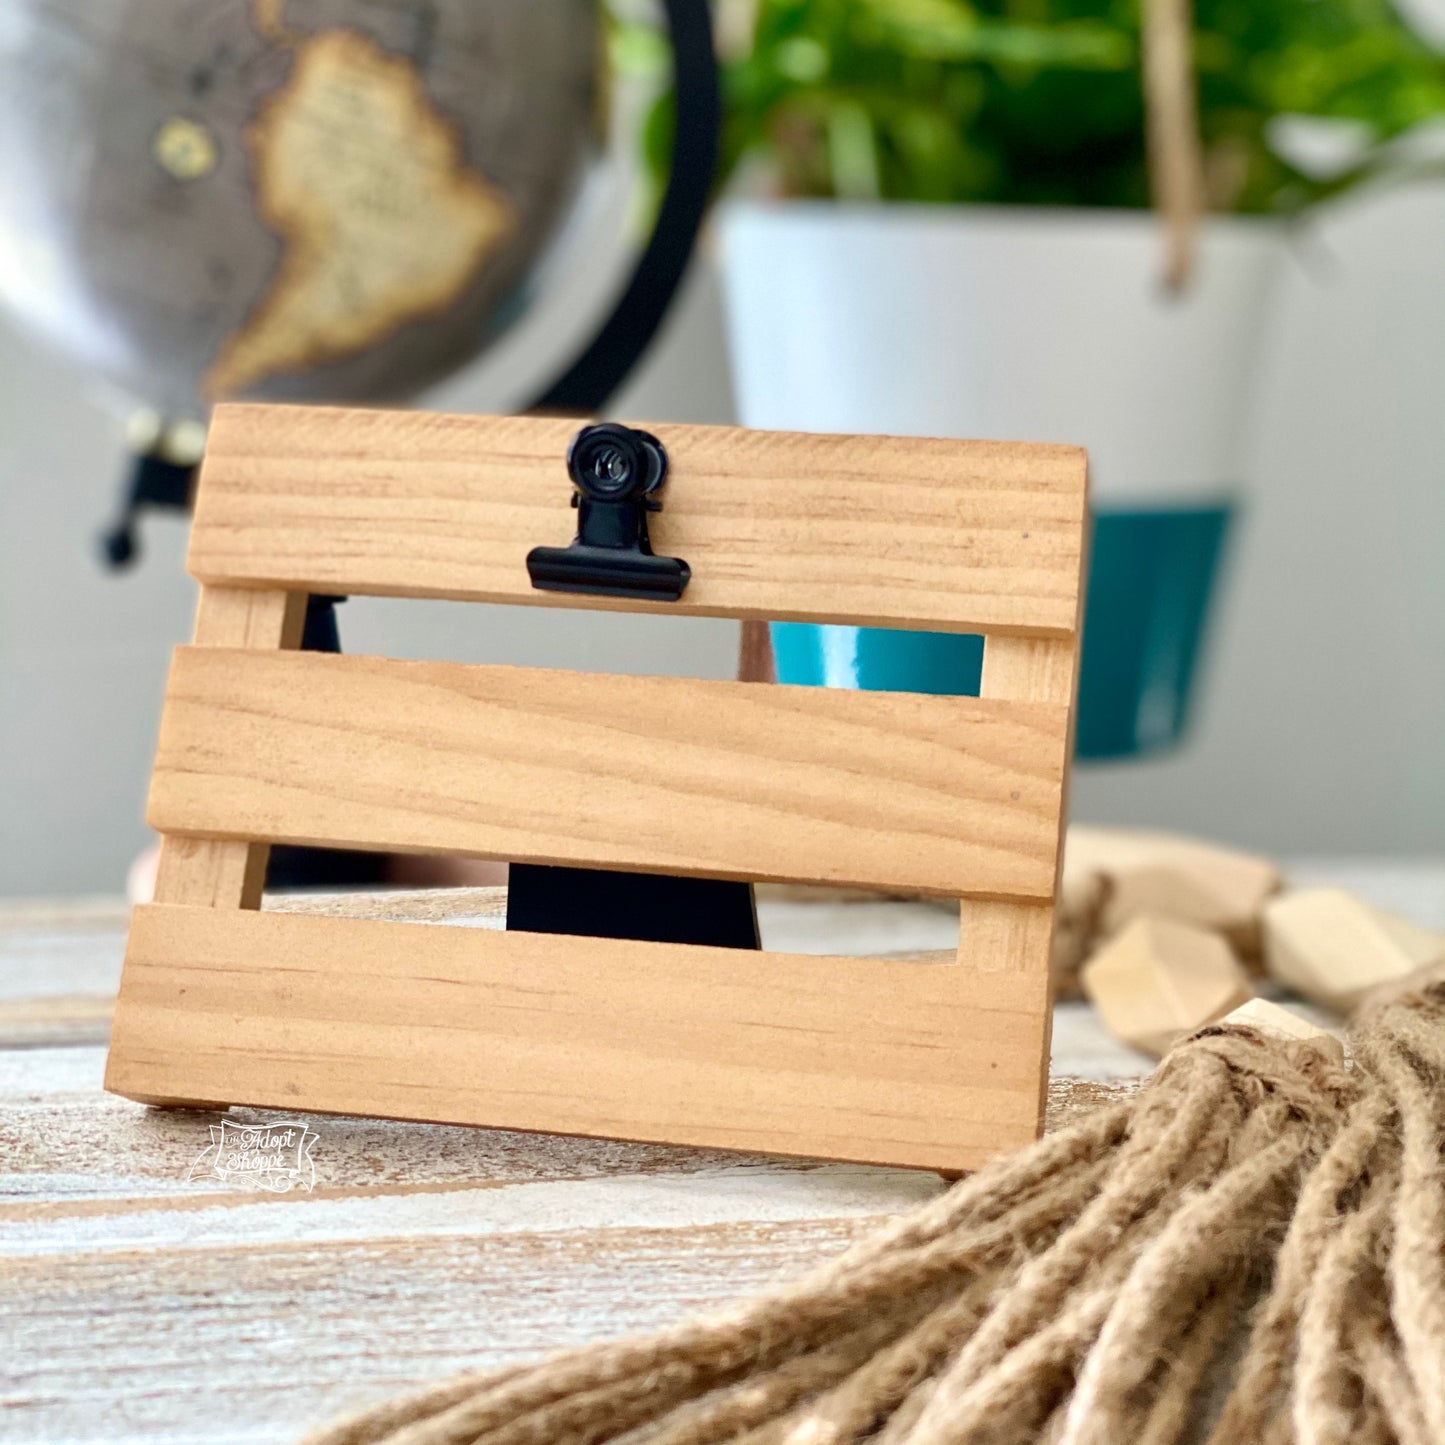 wooden clip frame (tiny slat/pallet) to be purchased with #TheAdoptShoppecards